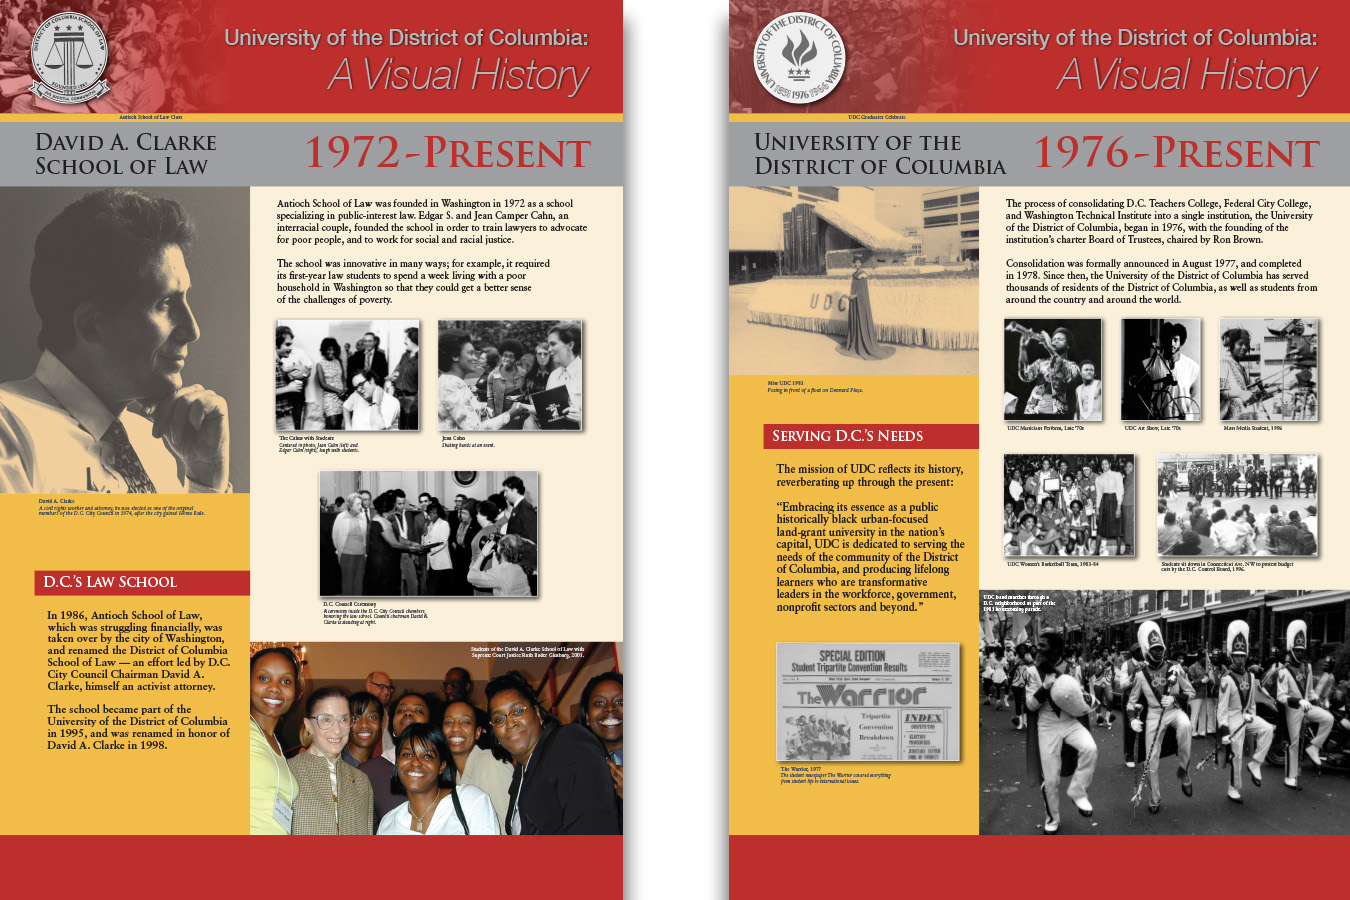 UDC pg4 : David A. Clarke School of Law was the most recent school to assimilate into UDC